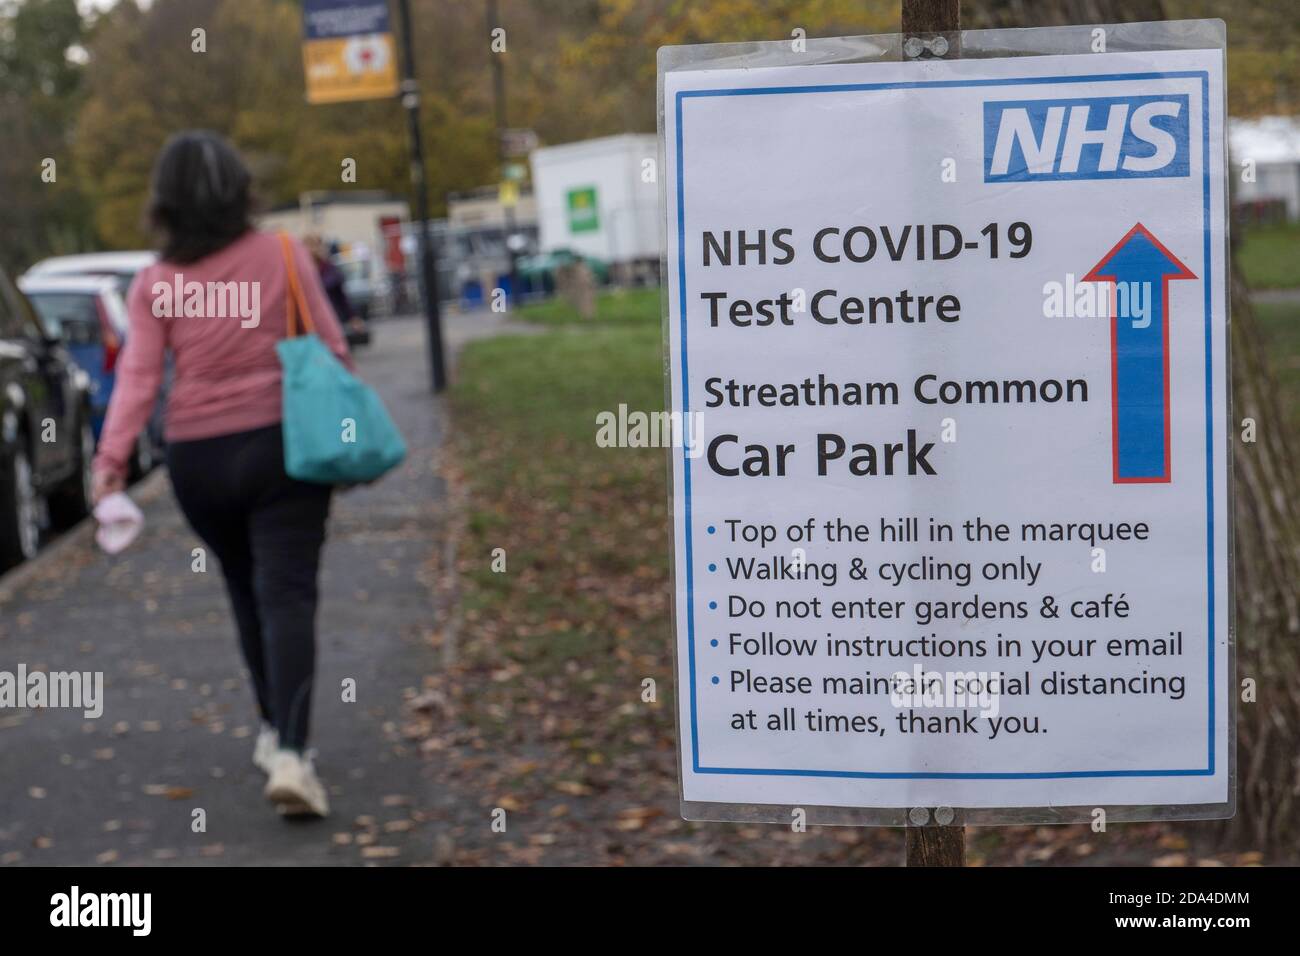 Streatham, London, England. 9th November 2020. A NHS Covid-19 test centre car park sign on Streatham Common in South London in the United Kingdom. (photo by Sam Mellish / Alamy Live News) Stock Photo